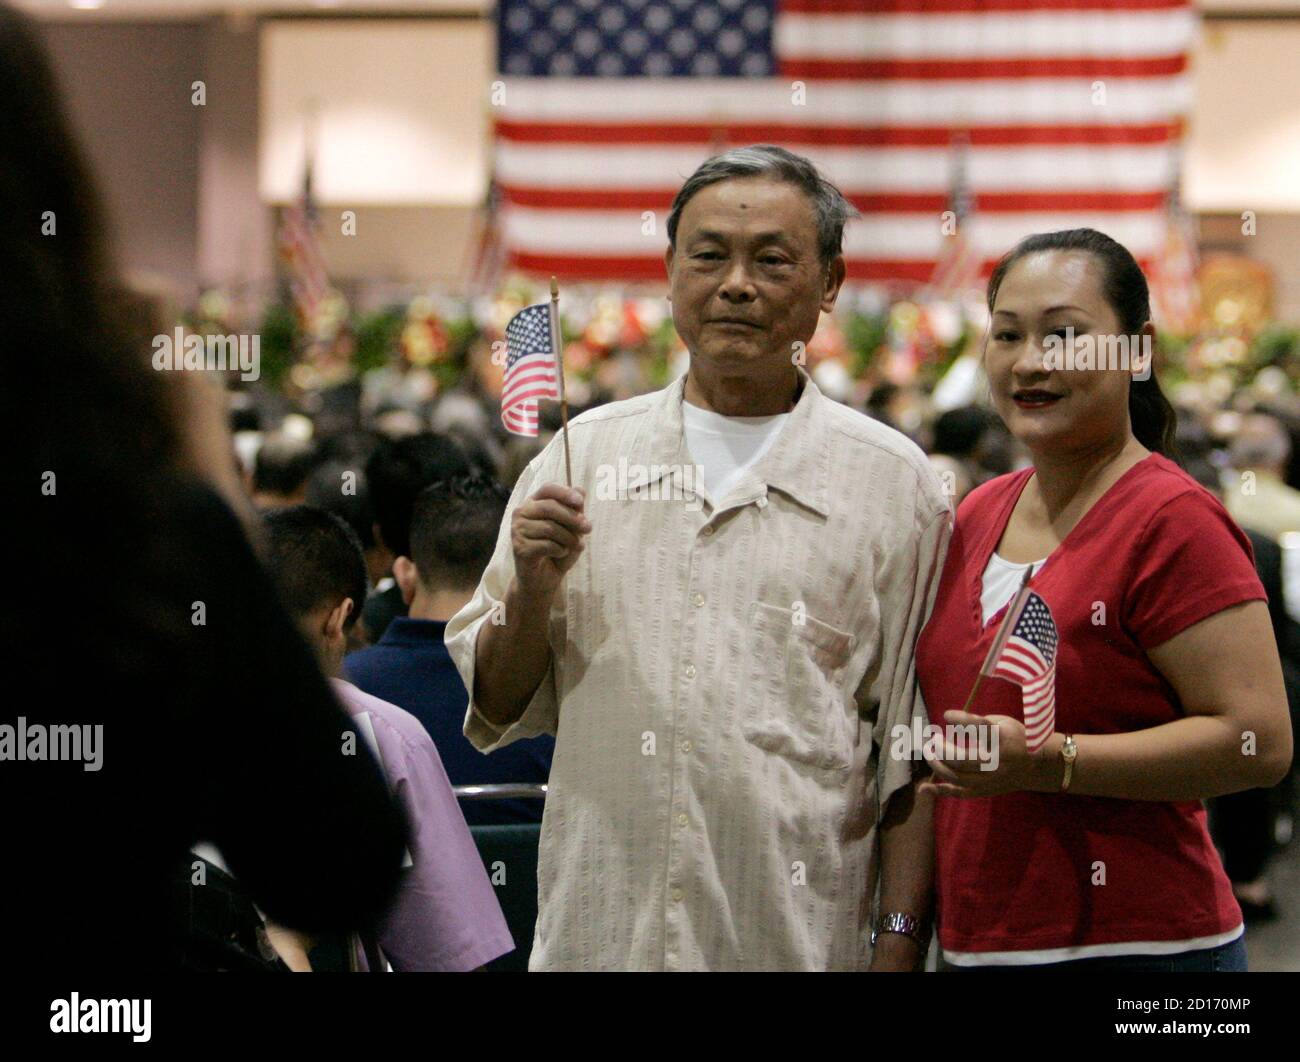 chinese-immigrants-mandy-fong-32-and-her-father-ying-zong-yu-70-have-their-photo-taken-before-a-naturalization-ceremony-in-los-angeles-september-22-2006-this-year-more-than-100000-people-from-los-angeles-about-one-fifth-of-the-half-million-who-take-the-oath-every-year-in-the-us-will-become-new-us-citizens-msnbc-reported-the-top-six-countries-represented-are-mexico-philippines-vietnam-south-korea-iran-and-el-salvador-reuterslucy-nicholson-united-states-2D170MP.jpg